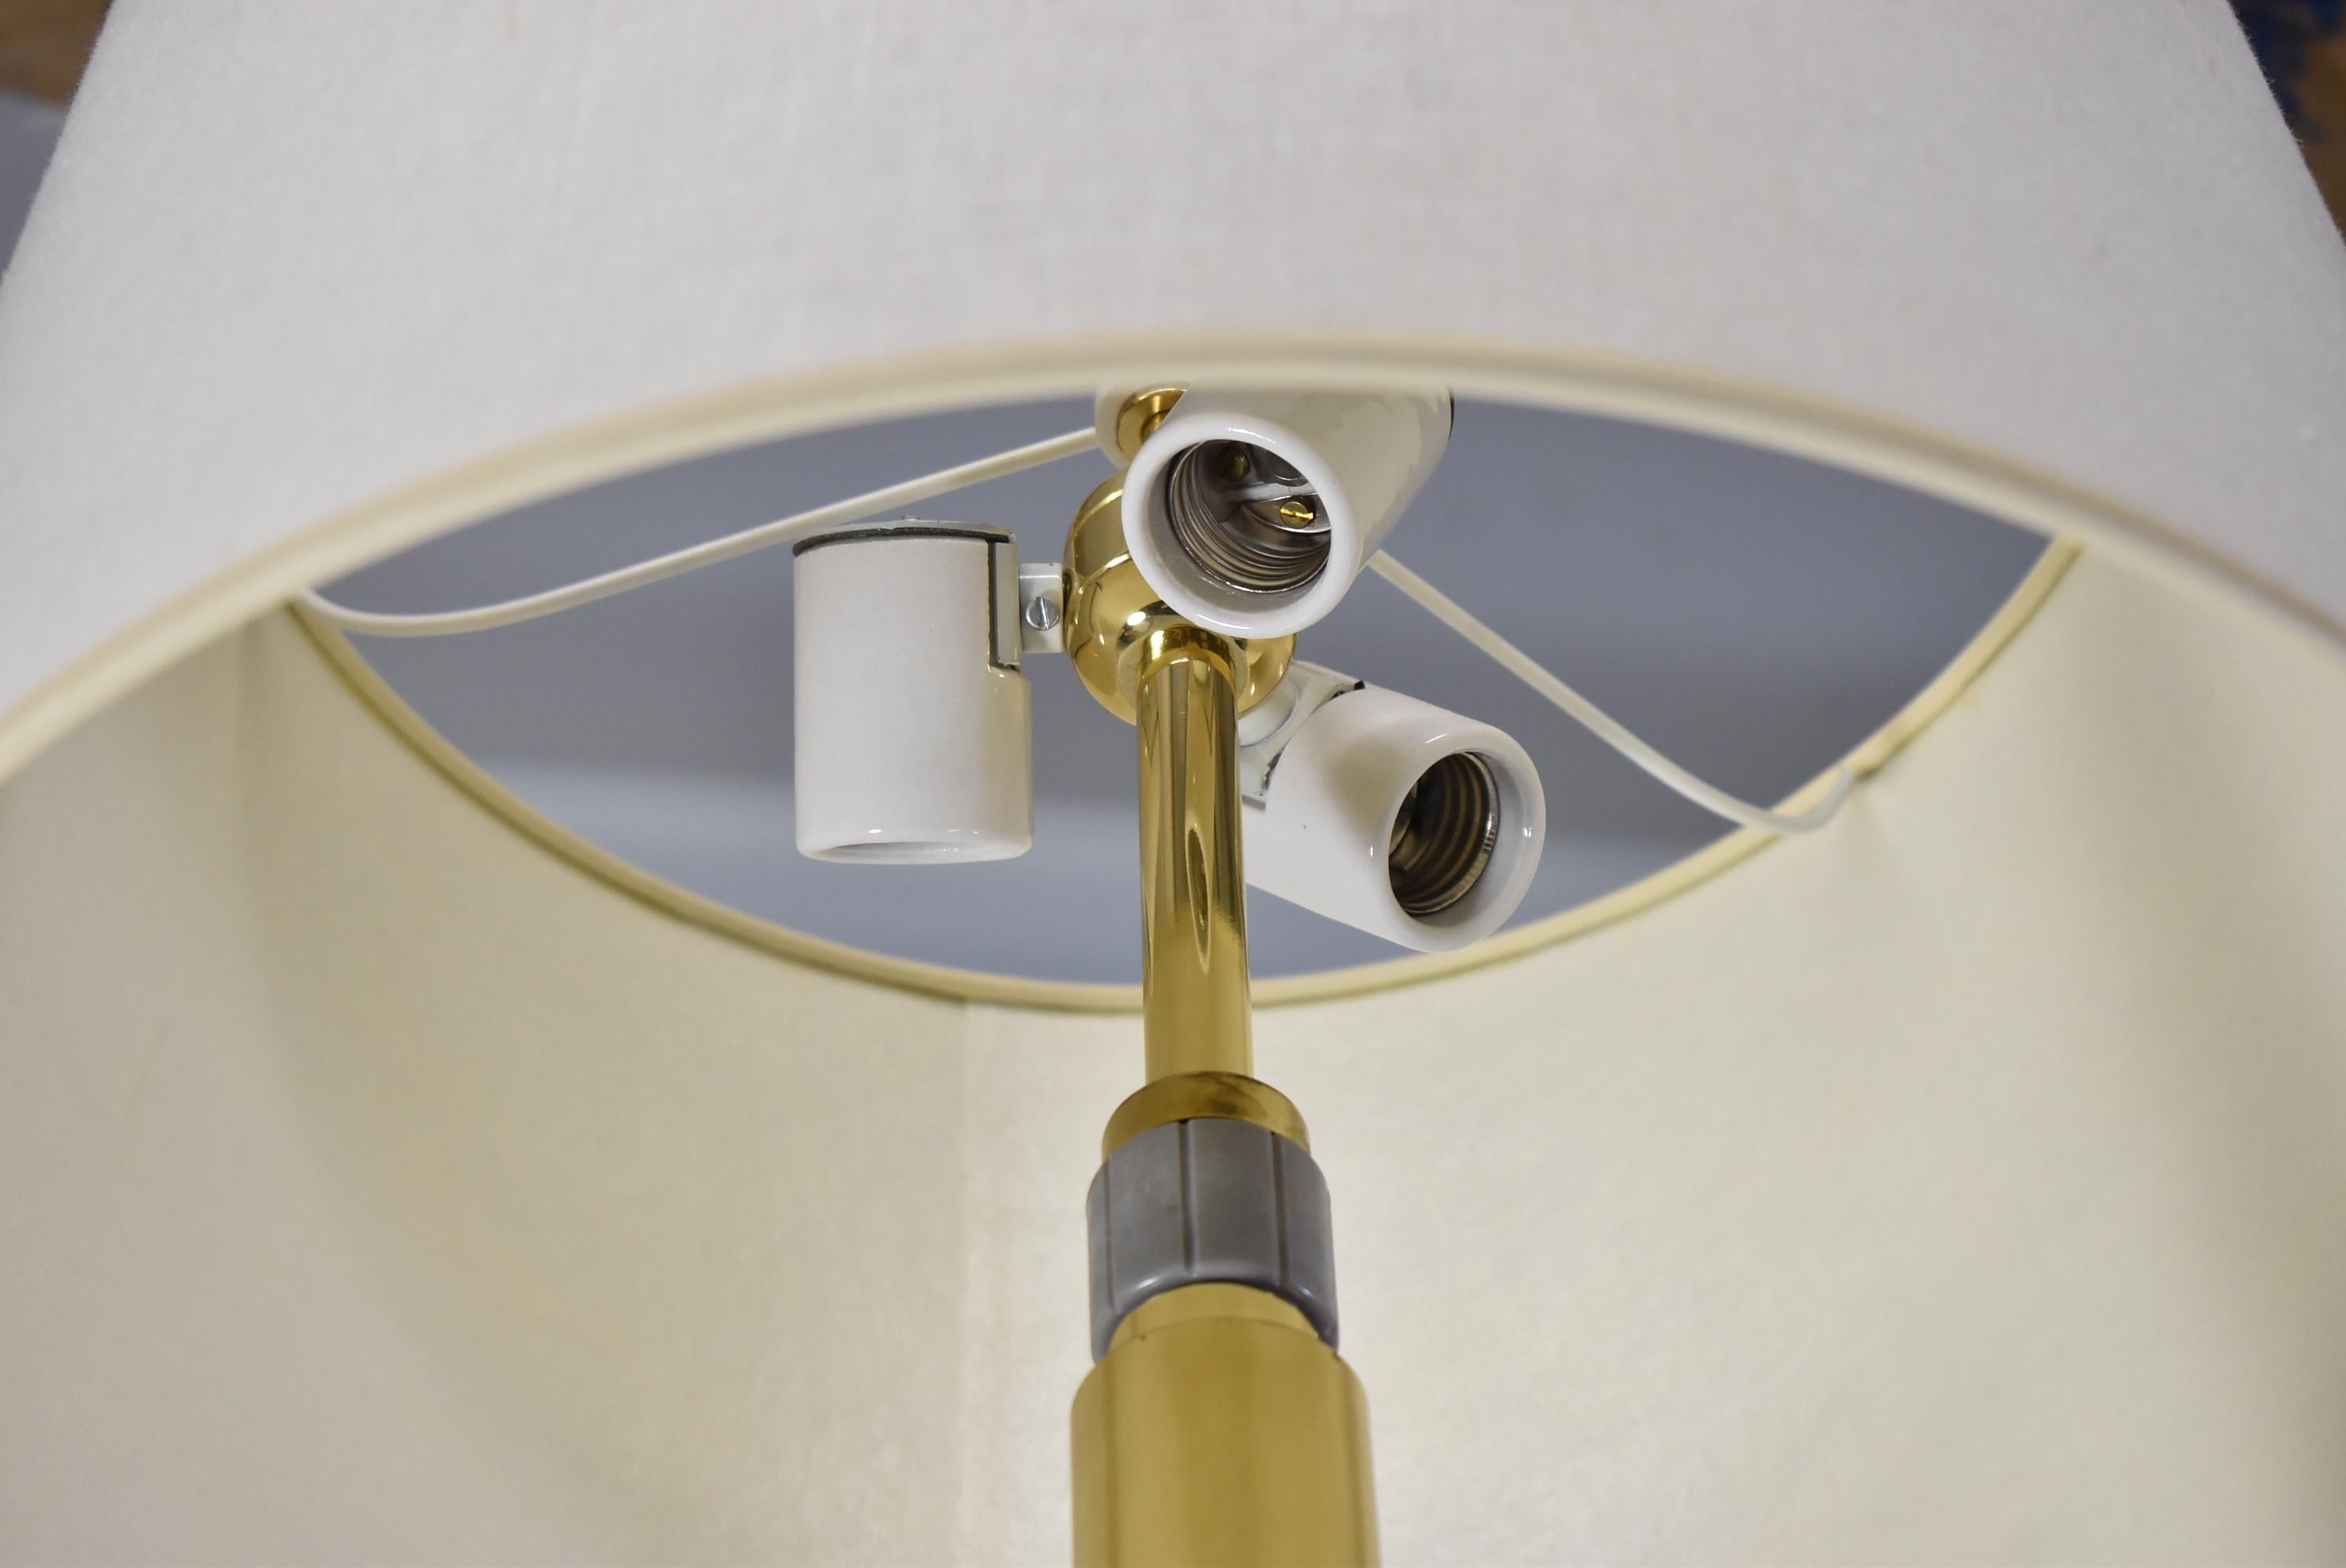 Mid-Century Modern brass and glass floor lamp. Made in the USA by Hansens of New York circa 1970. Three porcelain sockets. Twist turn off on switch. Dimensions: 57